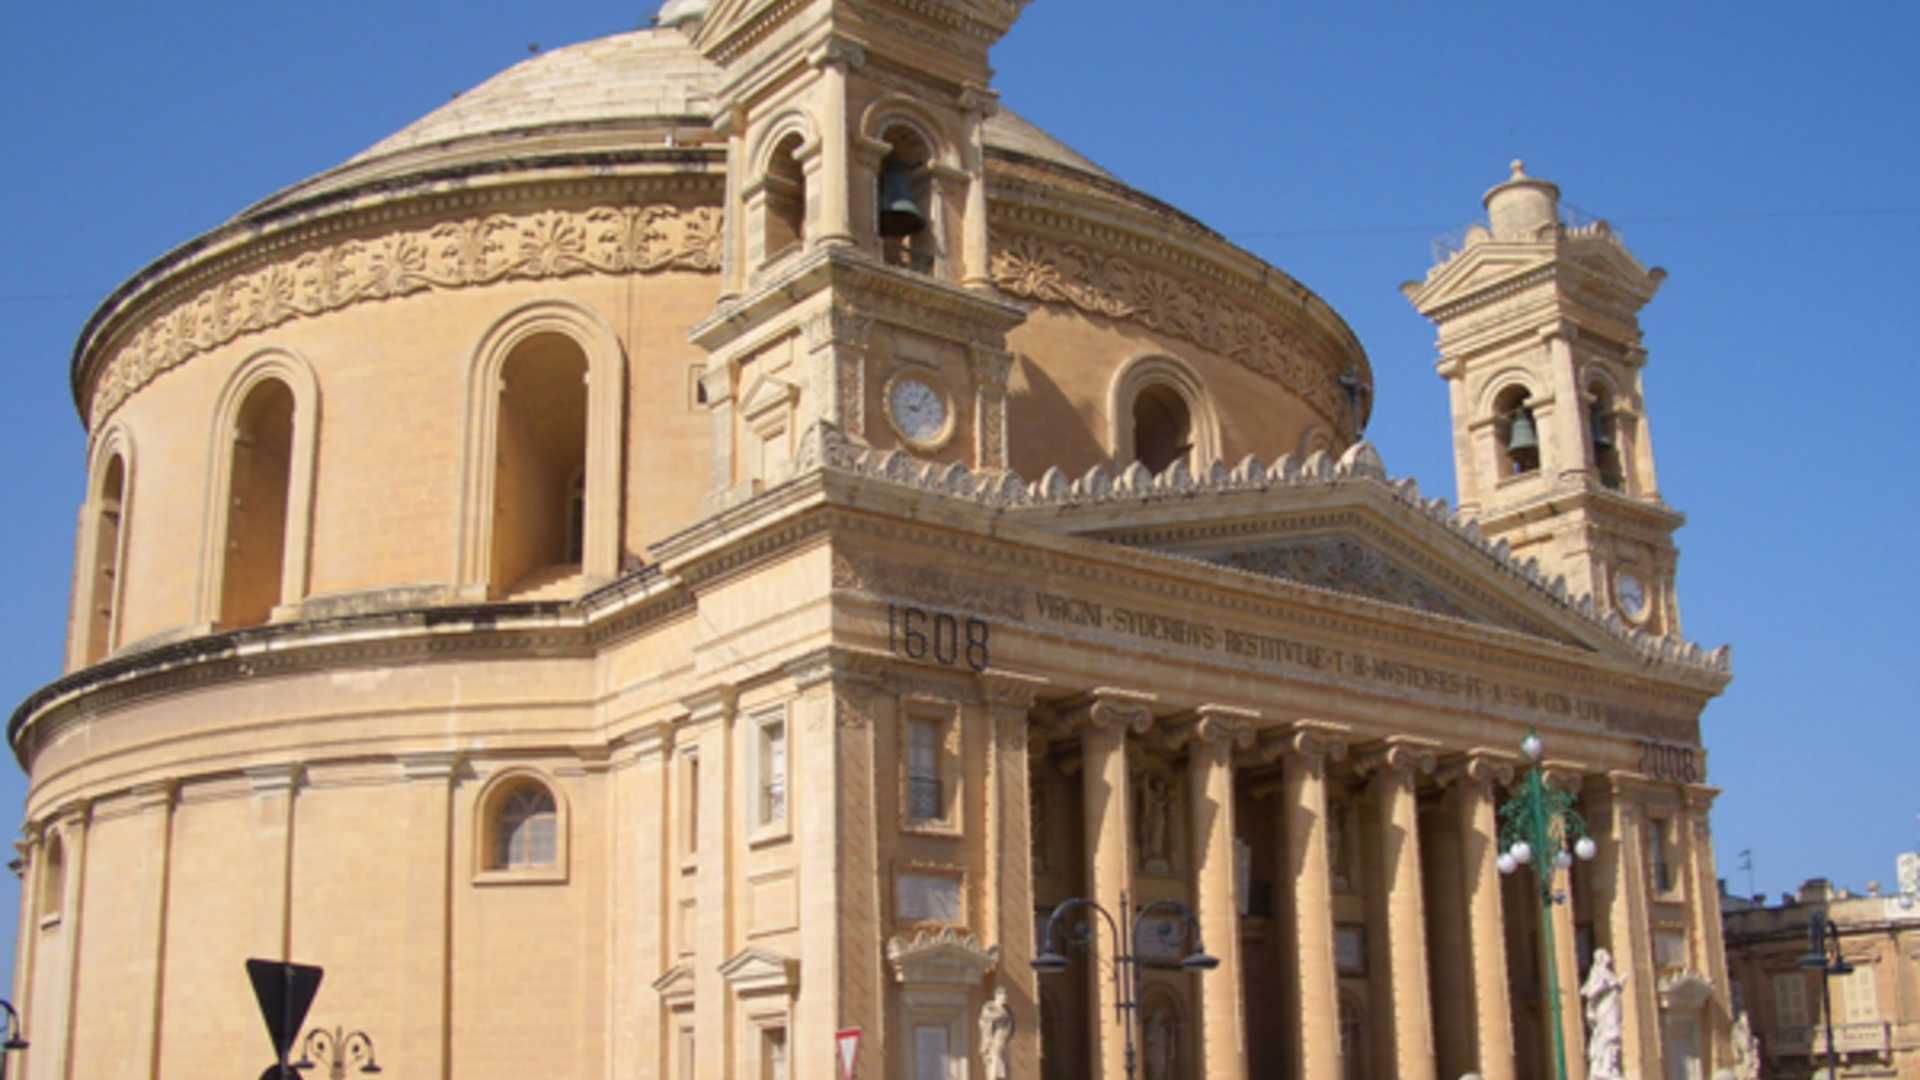 Mosta's Church and Dome